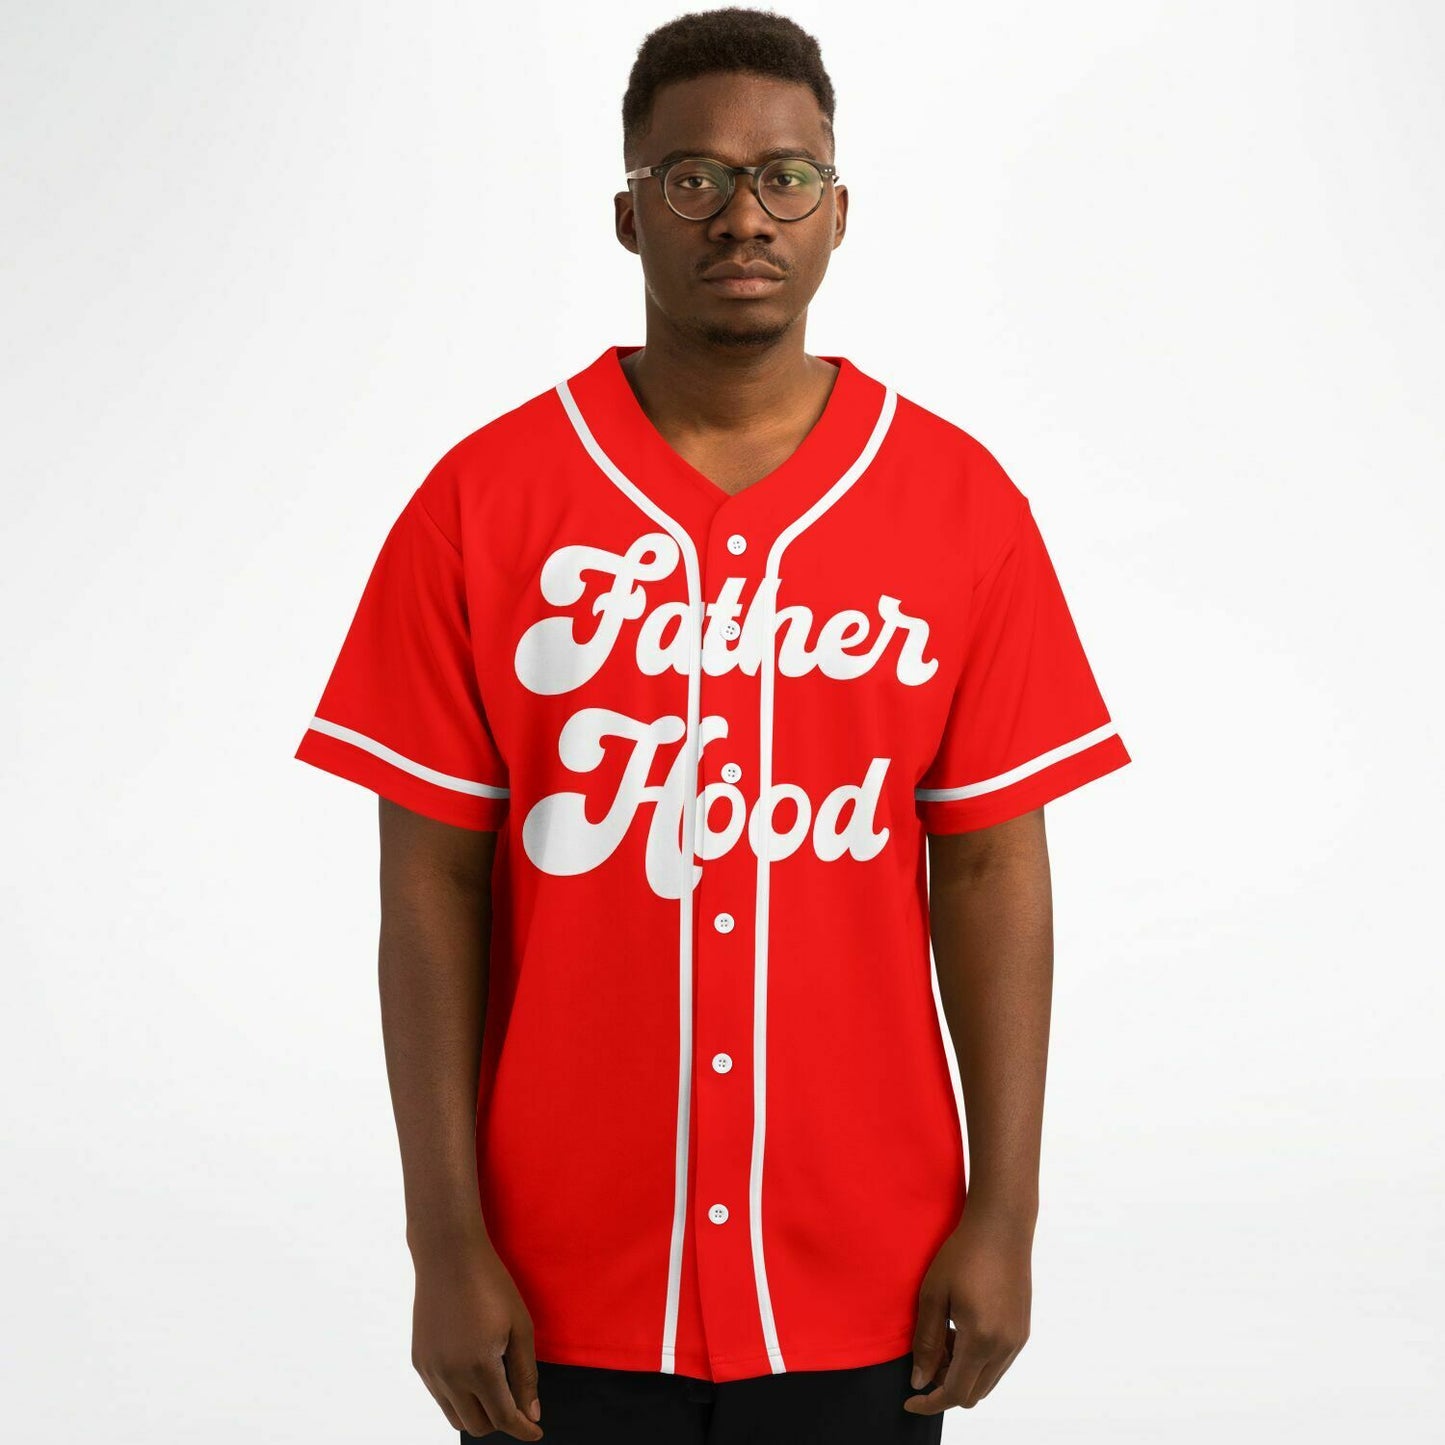 Father's Day Baseball Jersey - Red & White